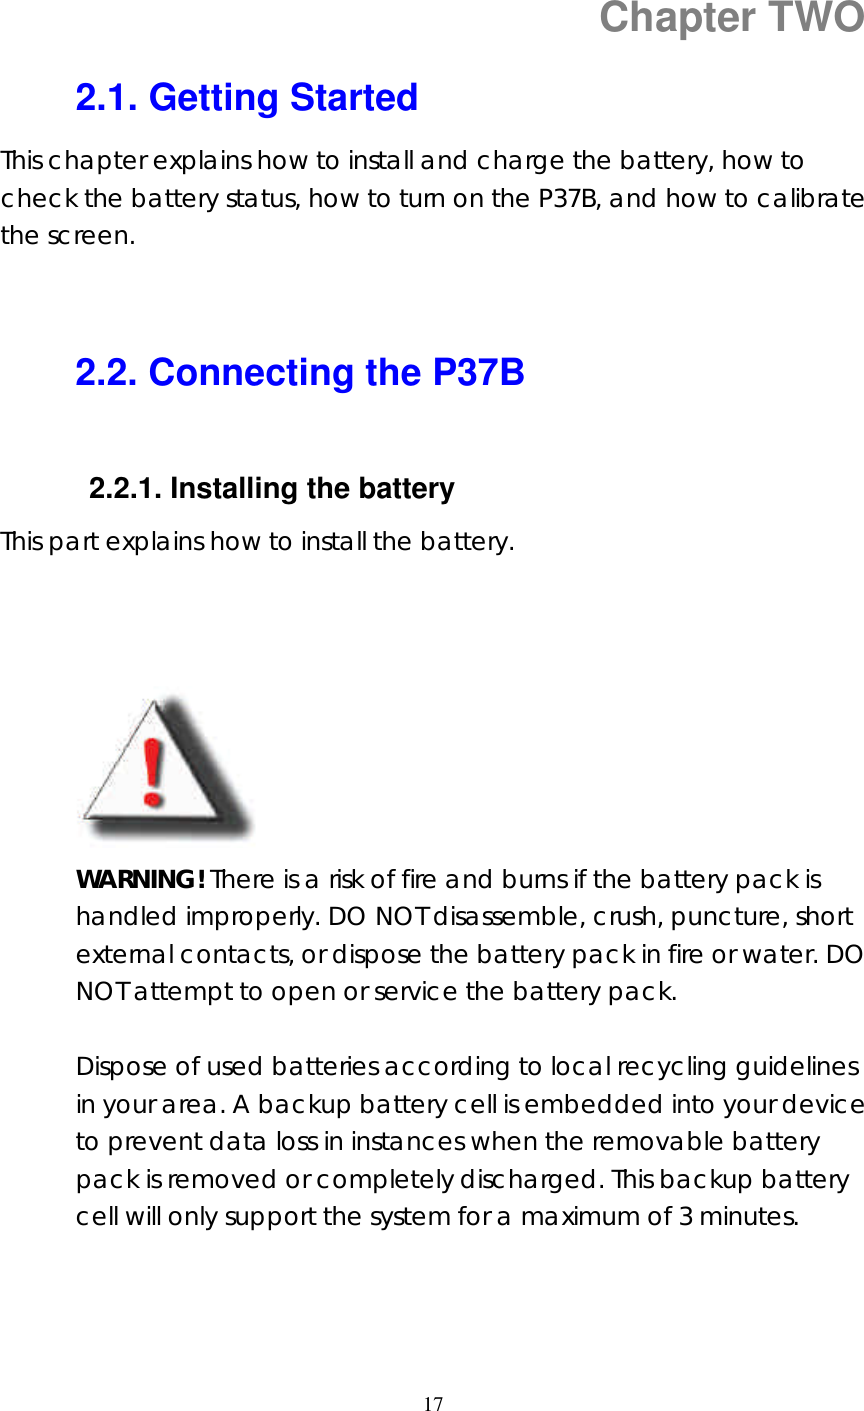  17  Chapter TWO 2.1. Getting Started This chapter explains how to install and charge the battery, how to check the battery status, how to turn on the P37B, and how to calibrate the screen.   2.2. Connecting the P37B  2.2.1. Installing the battery   This part explains how to install the battery.             WARNING! There is a risk of fire and burns if the battery pack is handled improperly. DO NOT disassemble, crush, puncture, short external contacts, or dispose the battery pack in fire or water. DO NOT attempt to open or service the battery pack.    Dispose of used batteries according to local recycling guidelines in your area. A backup battery cell is embedded into your device to prevent data loss in instances when the removable battery pack is removed or completely discharged. This backup battery cell will only support the system for a maximum of 3 minutes.     